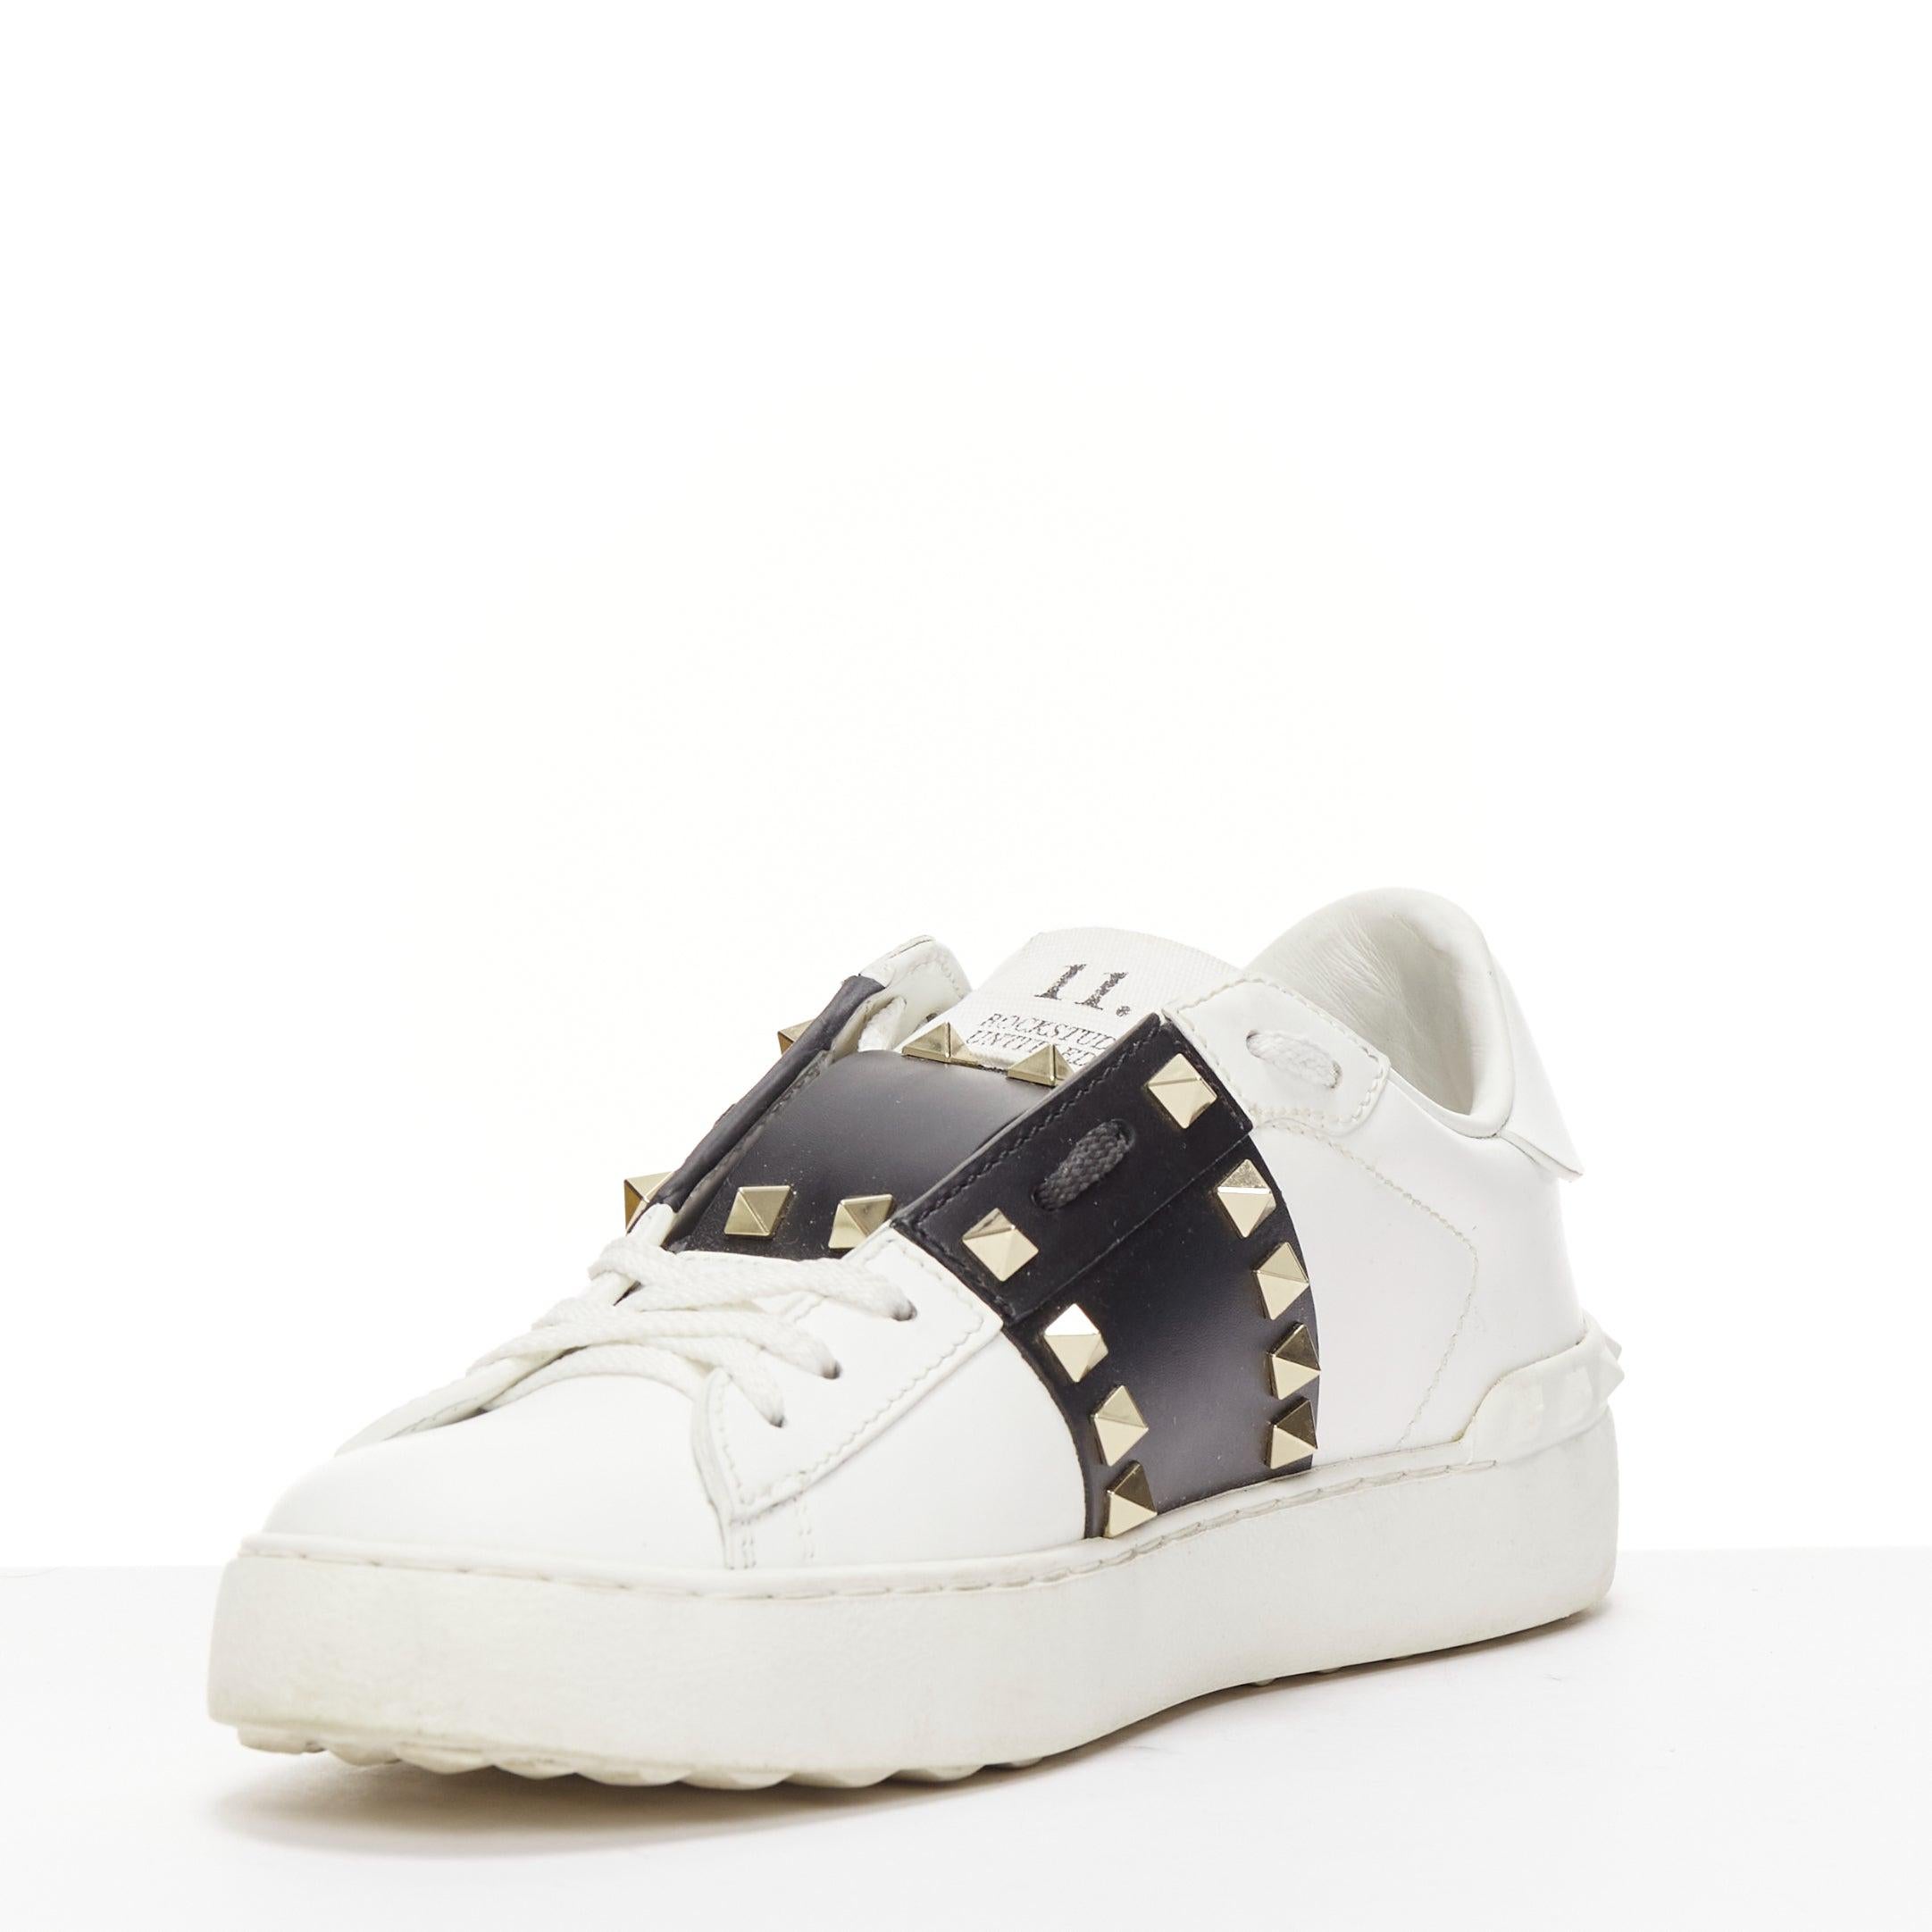 VALENTINO Rockstud Untitled Open black white leather studded sneakers EU37 For Sale 1